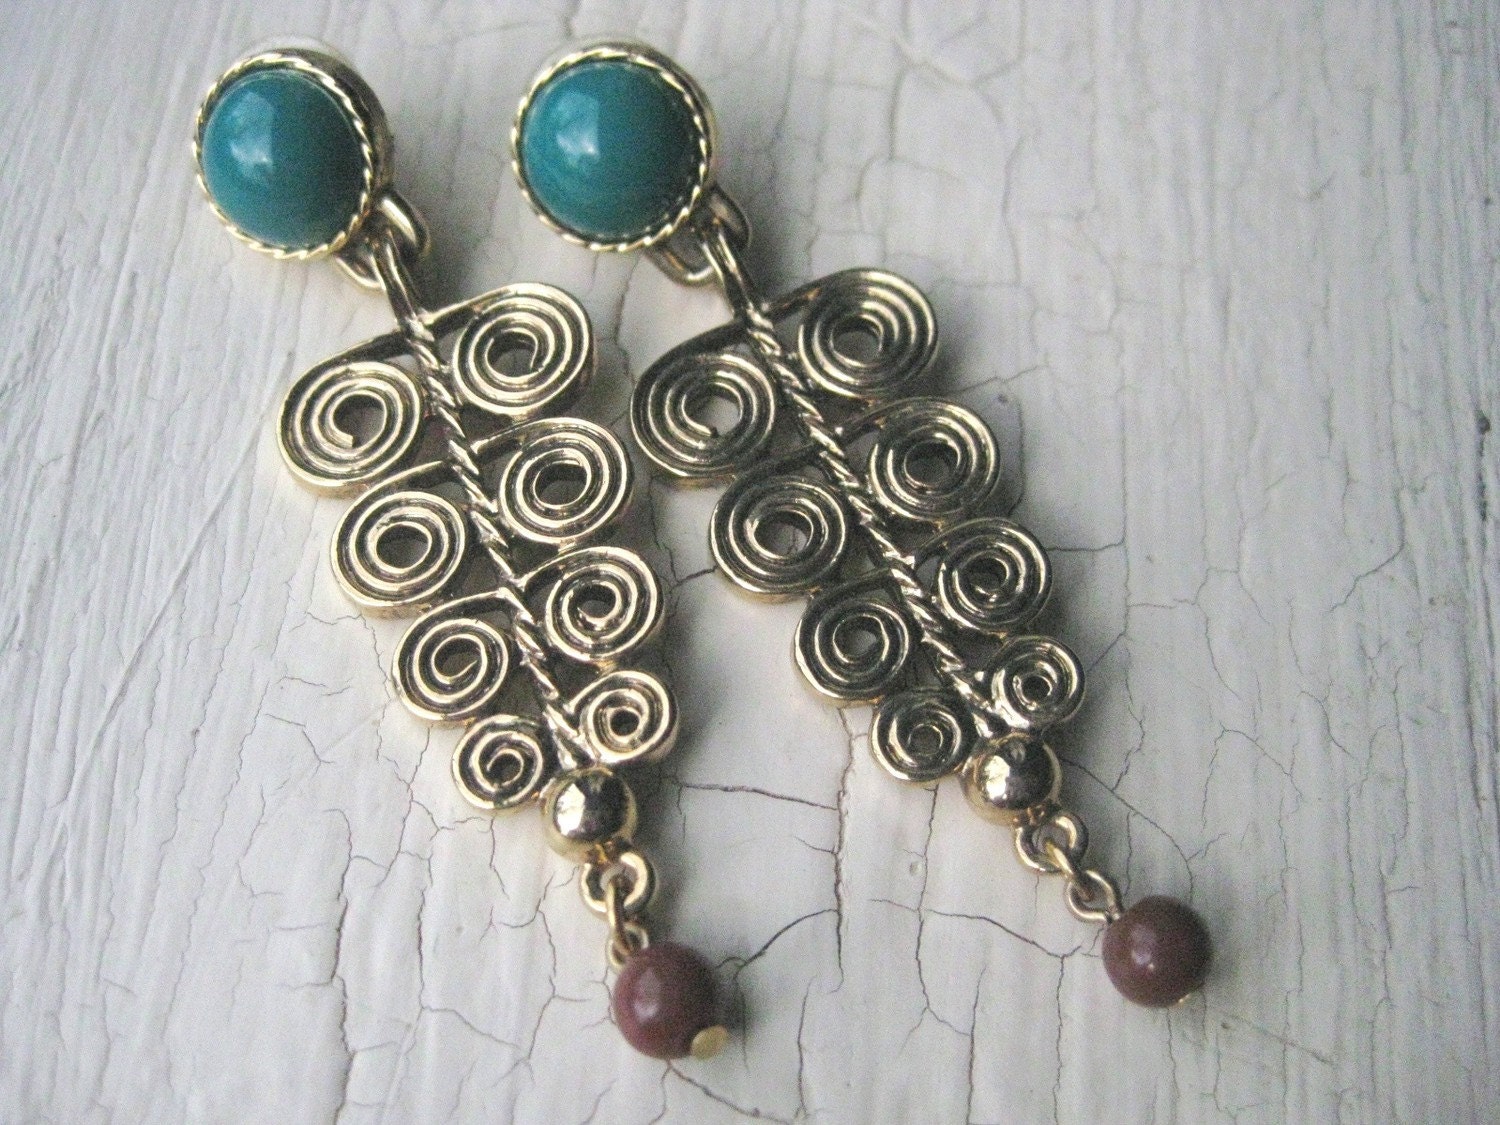 Lovely Vintage Long Swirl Earrings Gold tone with turquoise color accent